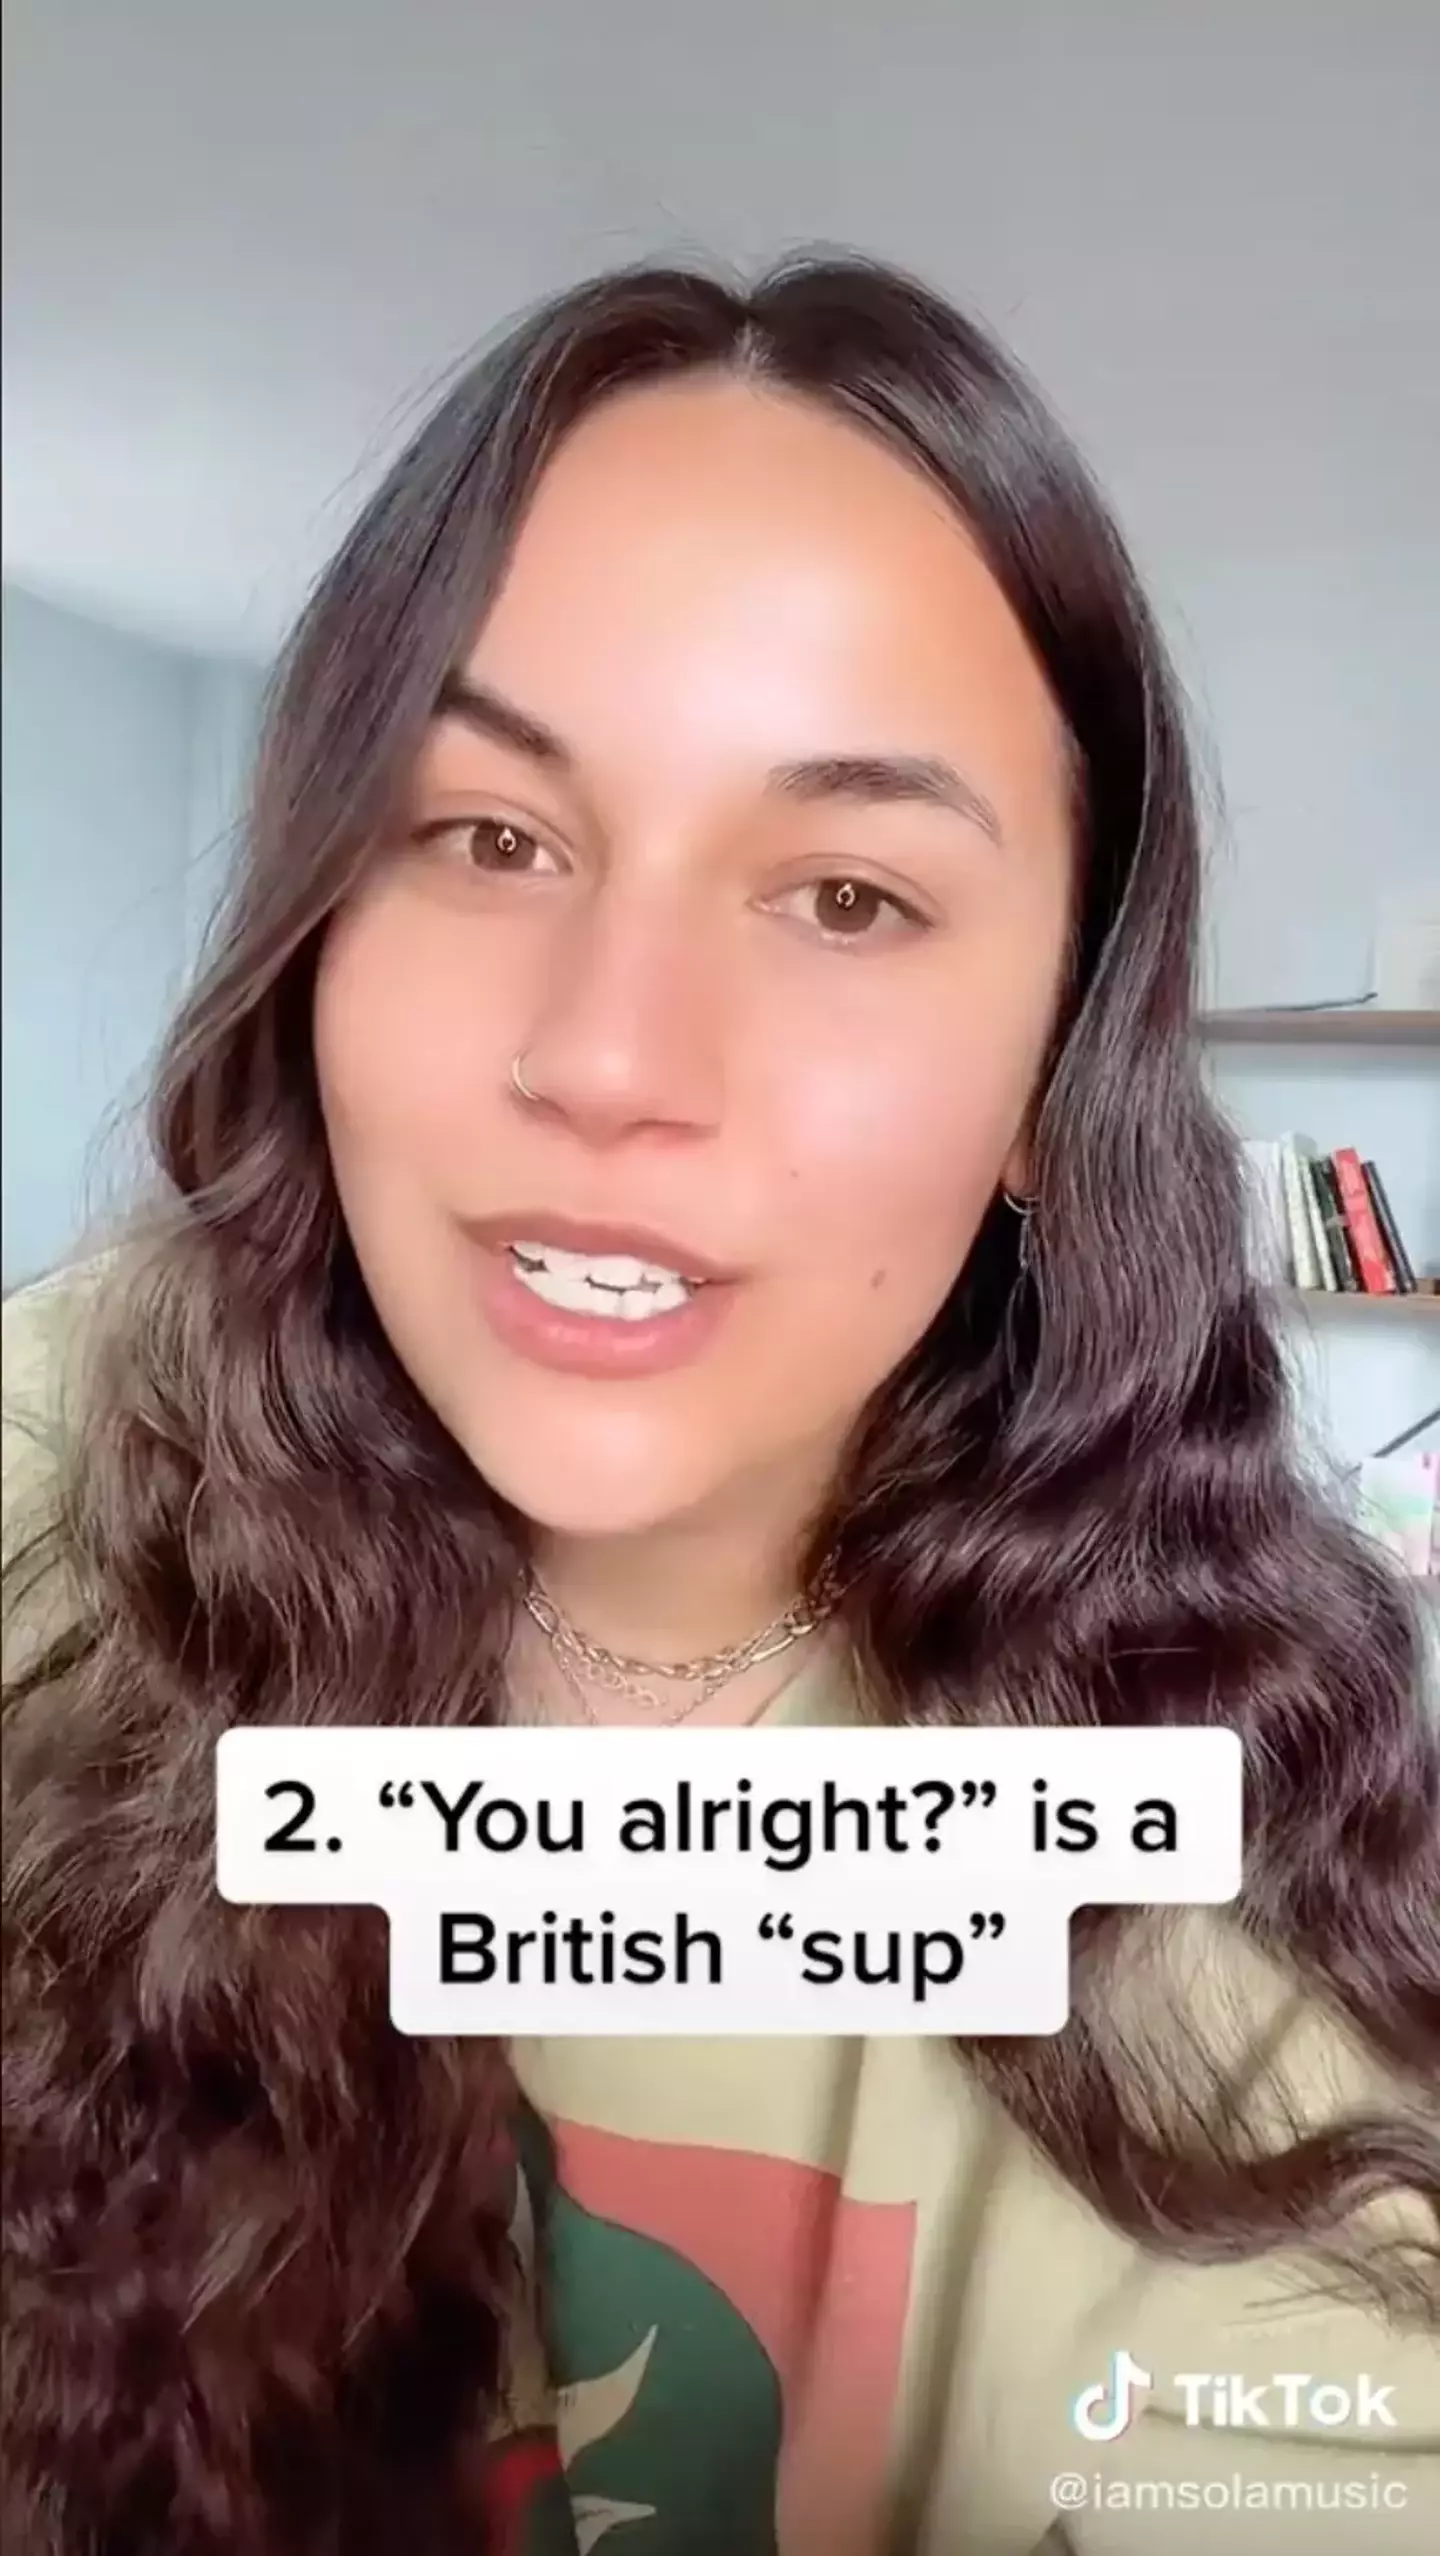 California-born singer Sola took to TikTok to share everything she's learned about British culture.